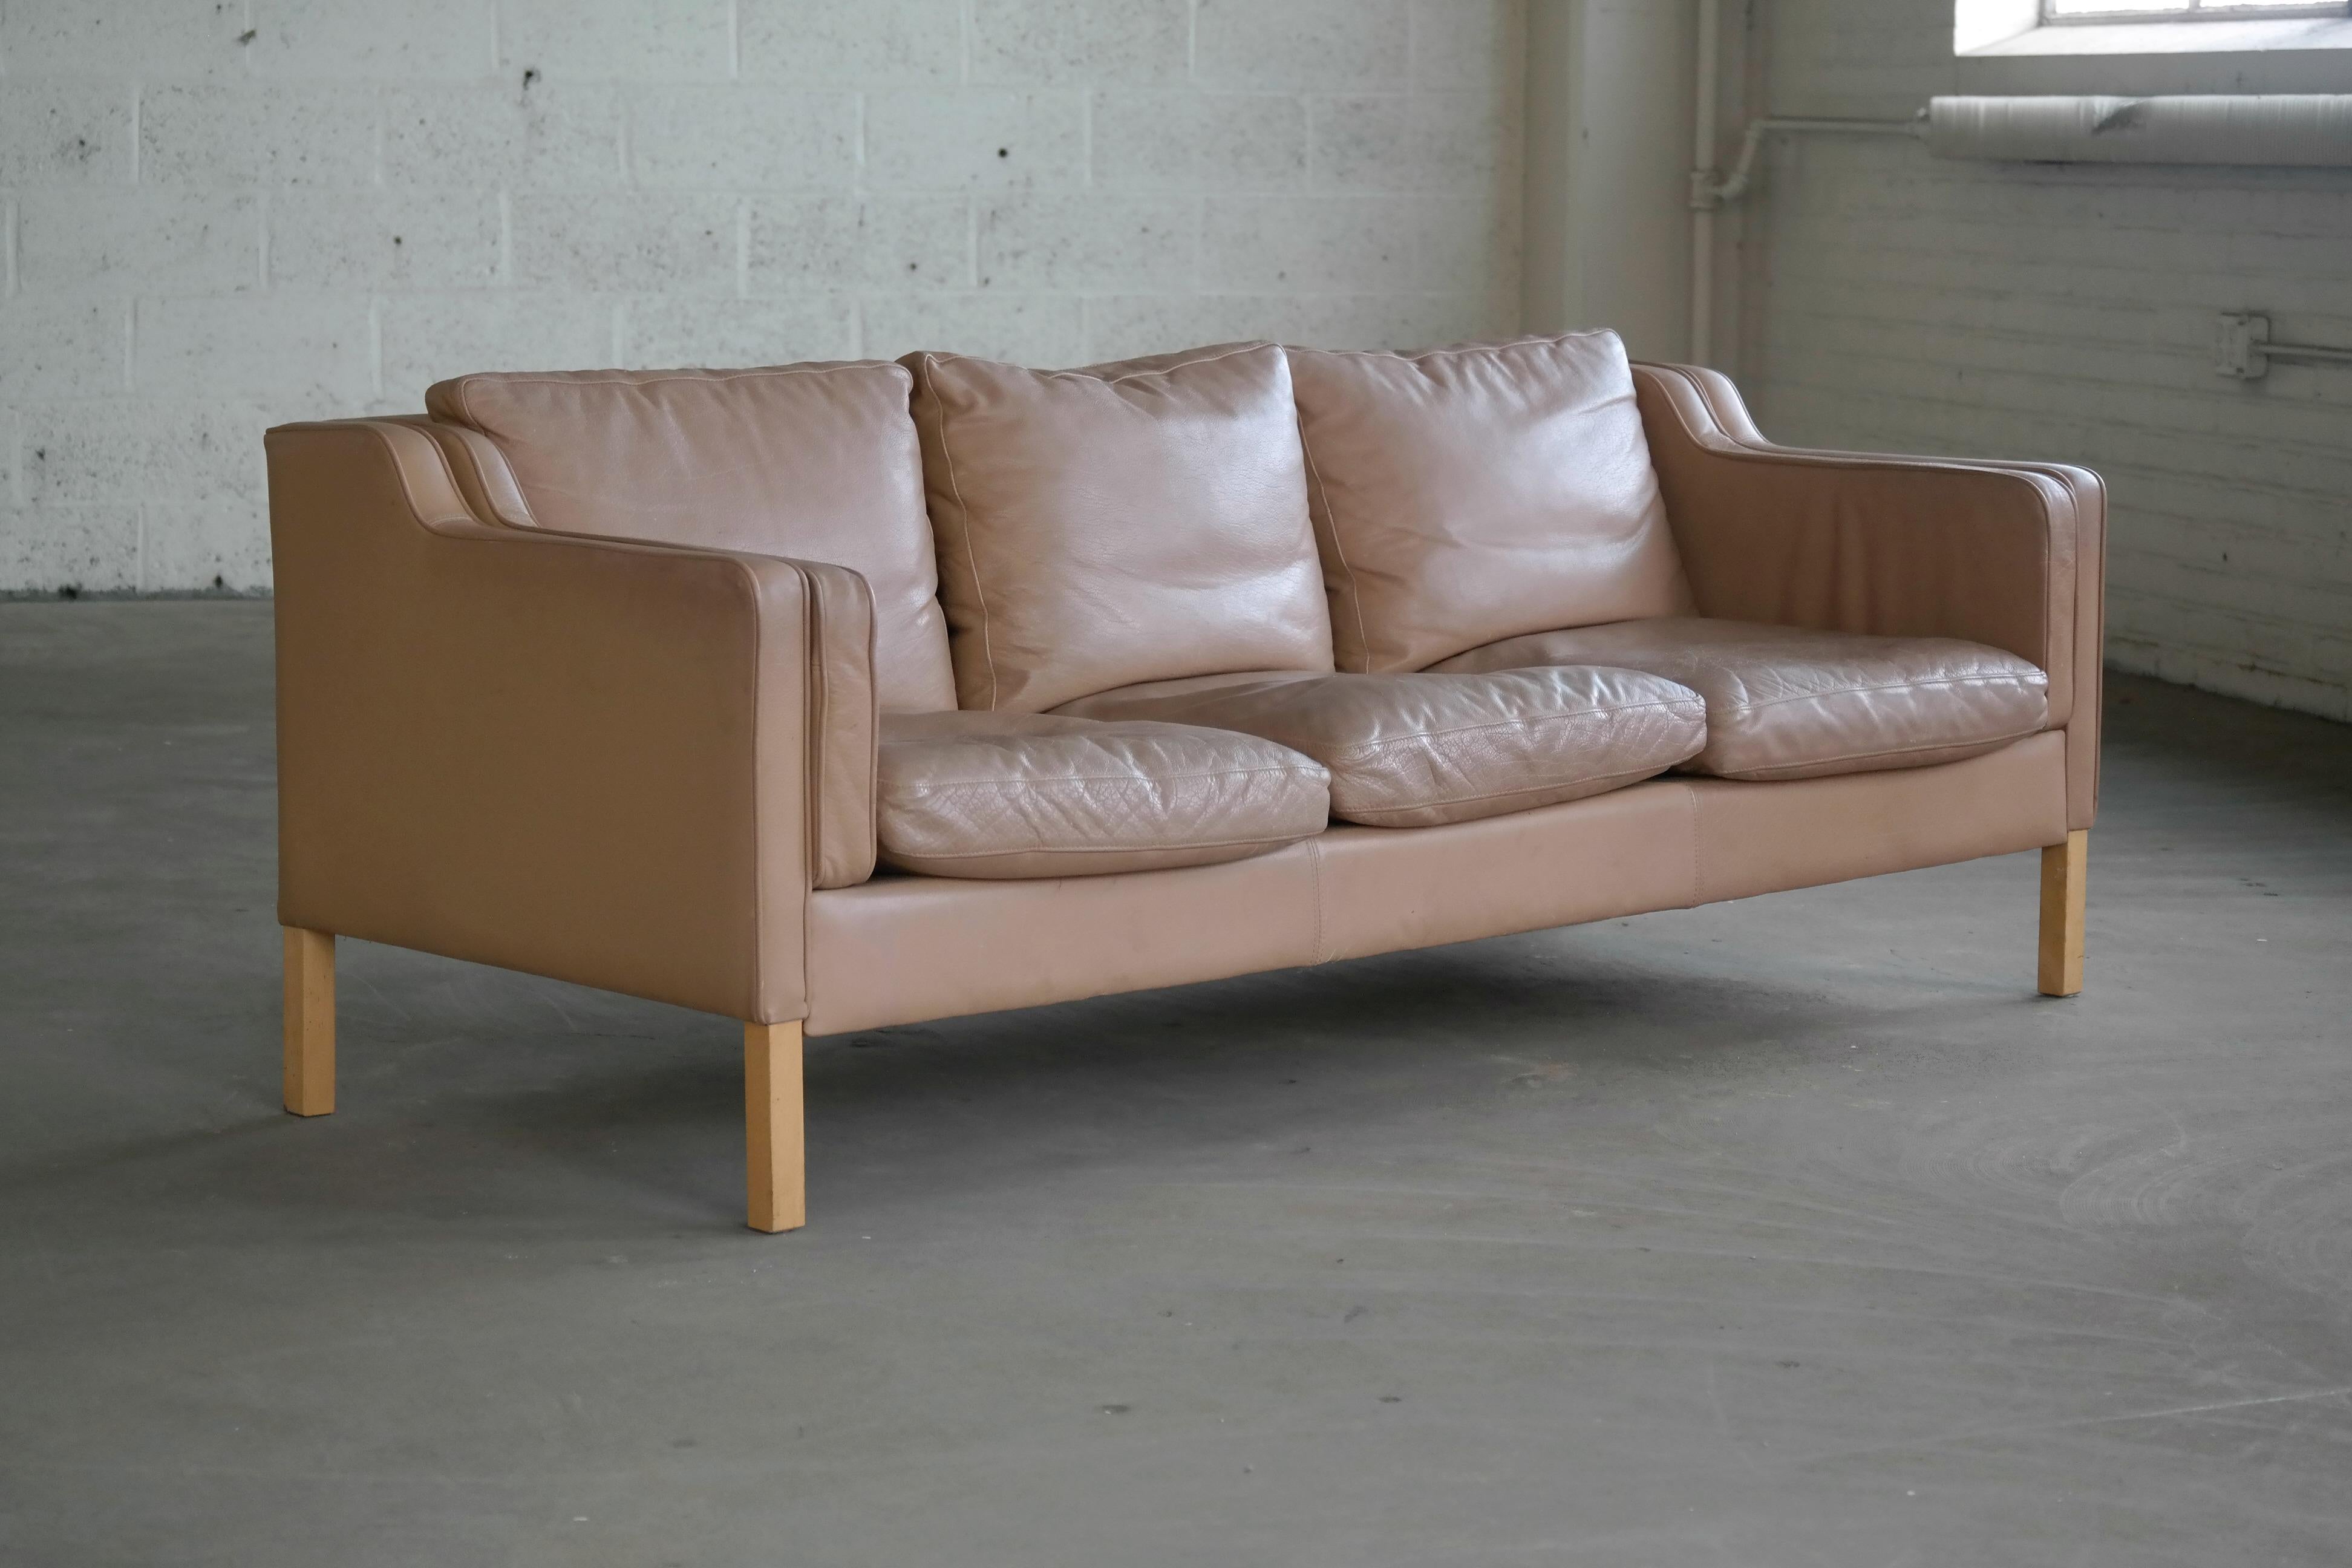 Classic Danish Midcentury Sofa in Tan Leather in the Style of Børge Mogensen 7